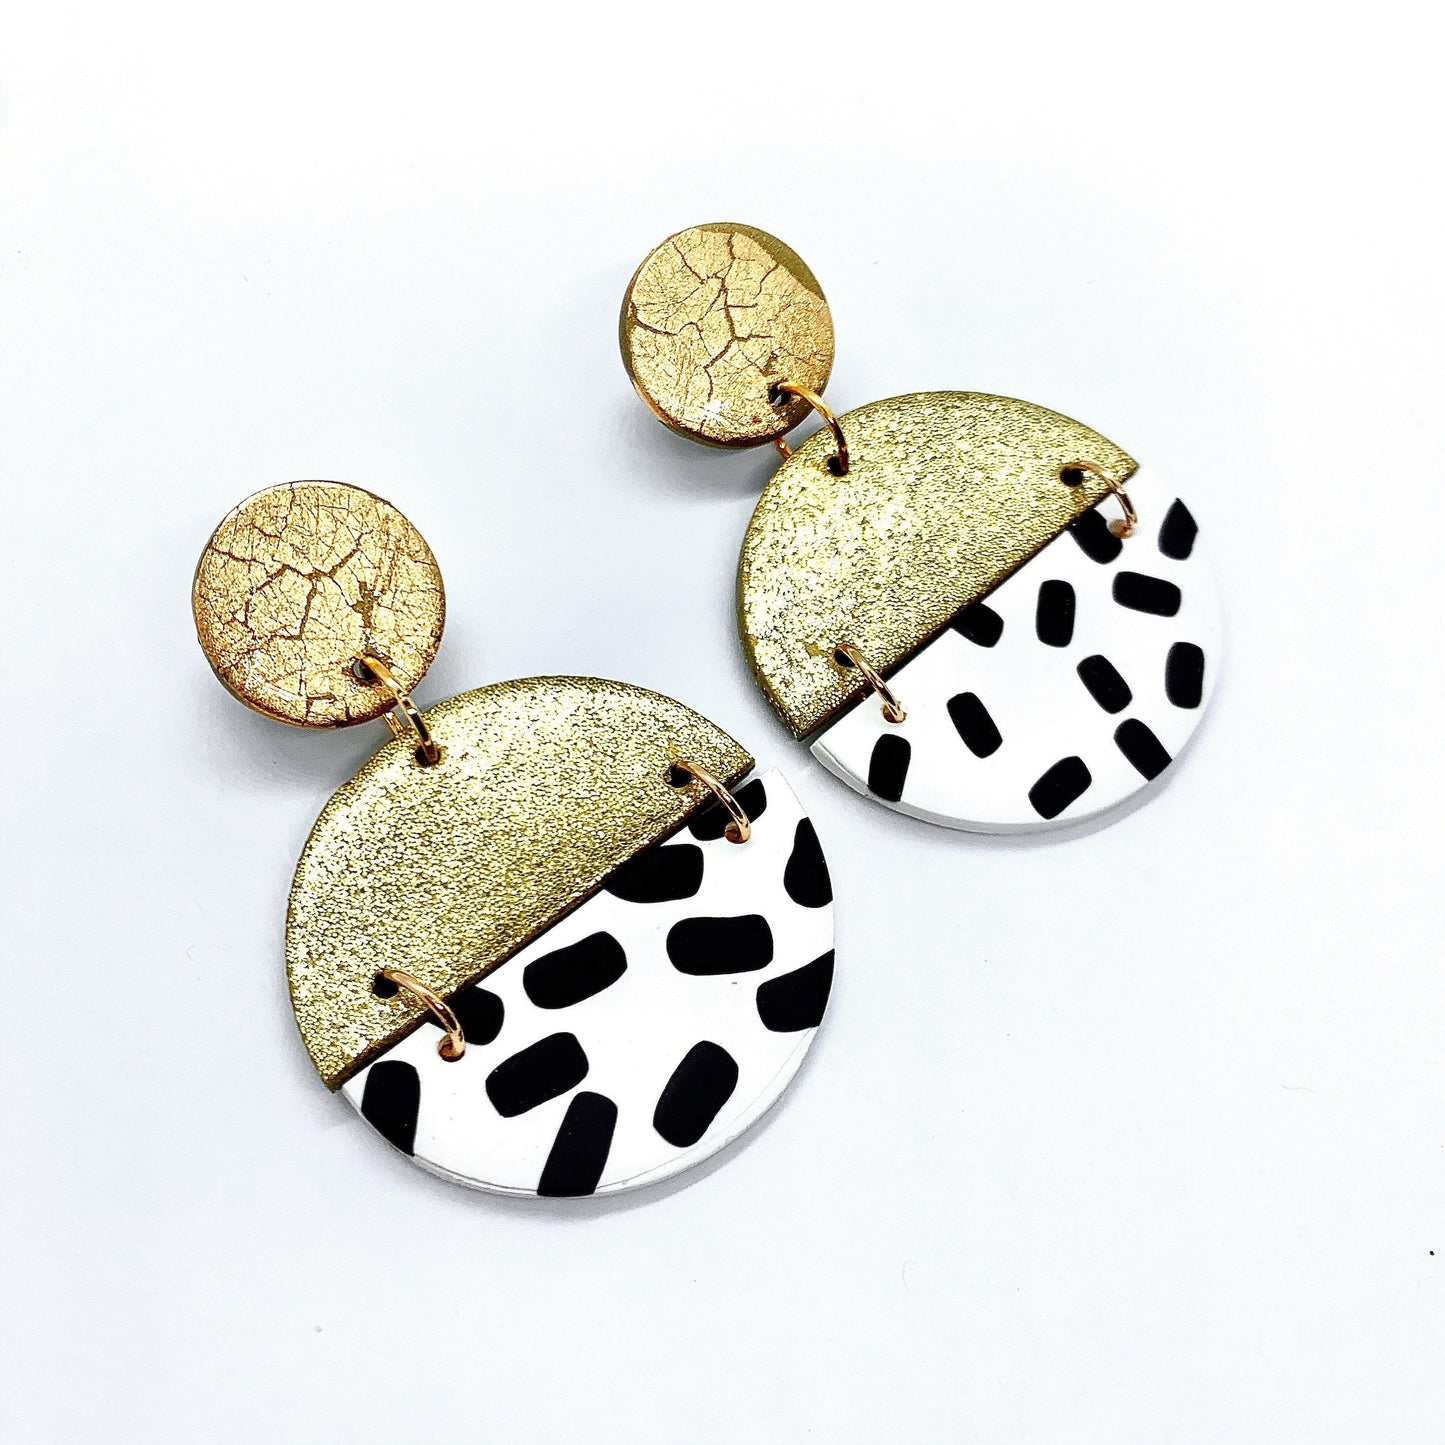 handmade polymer clay earrings in gold glitter and black and white spots